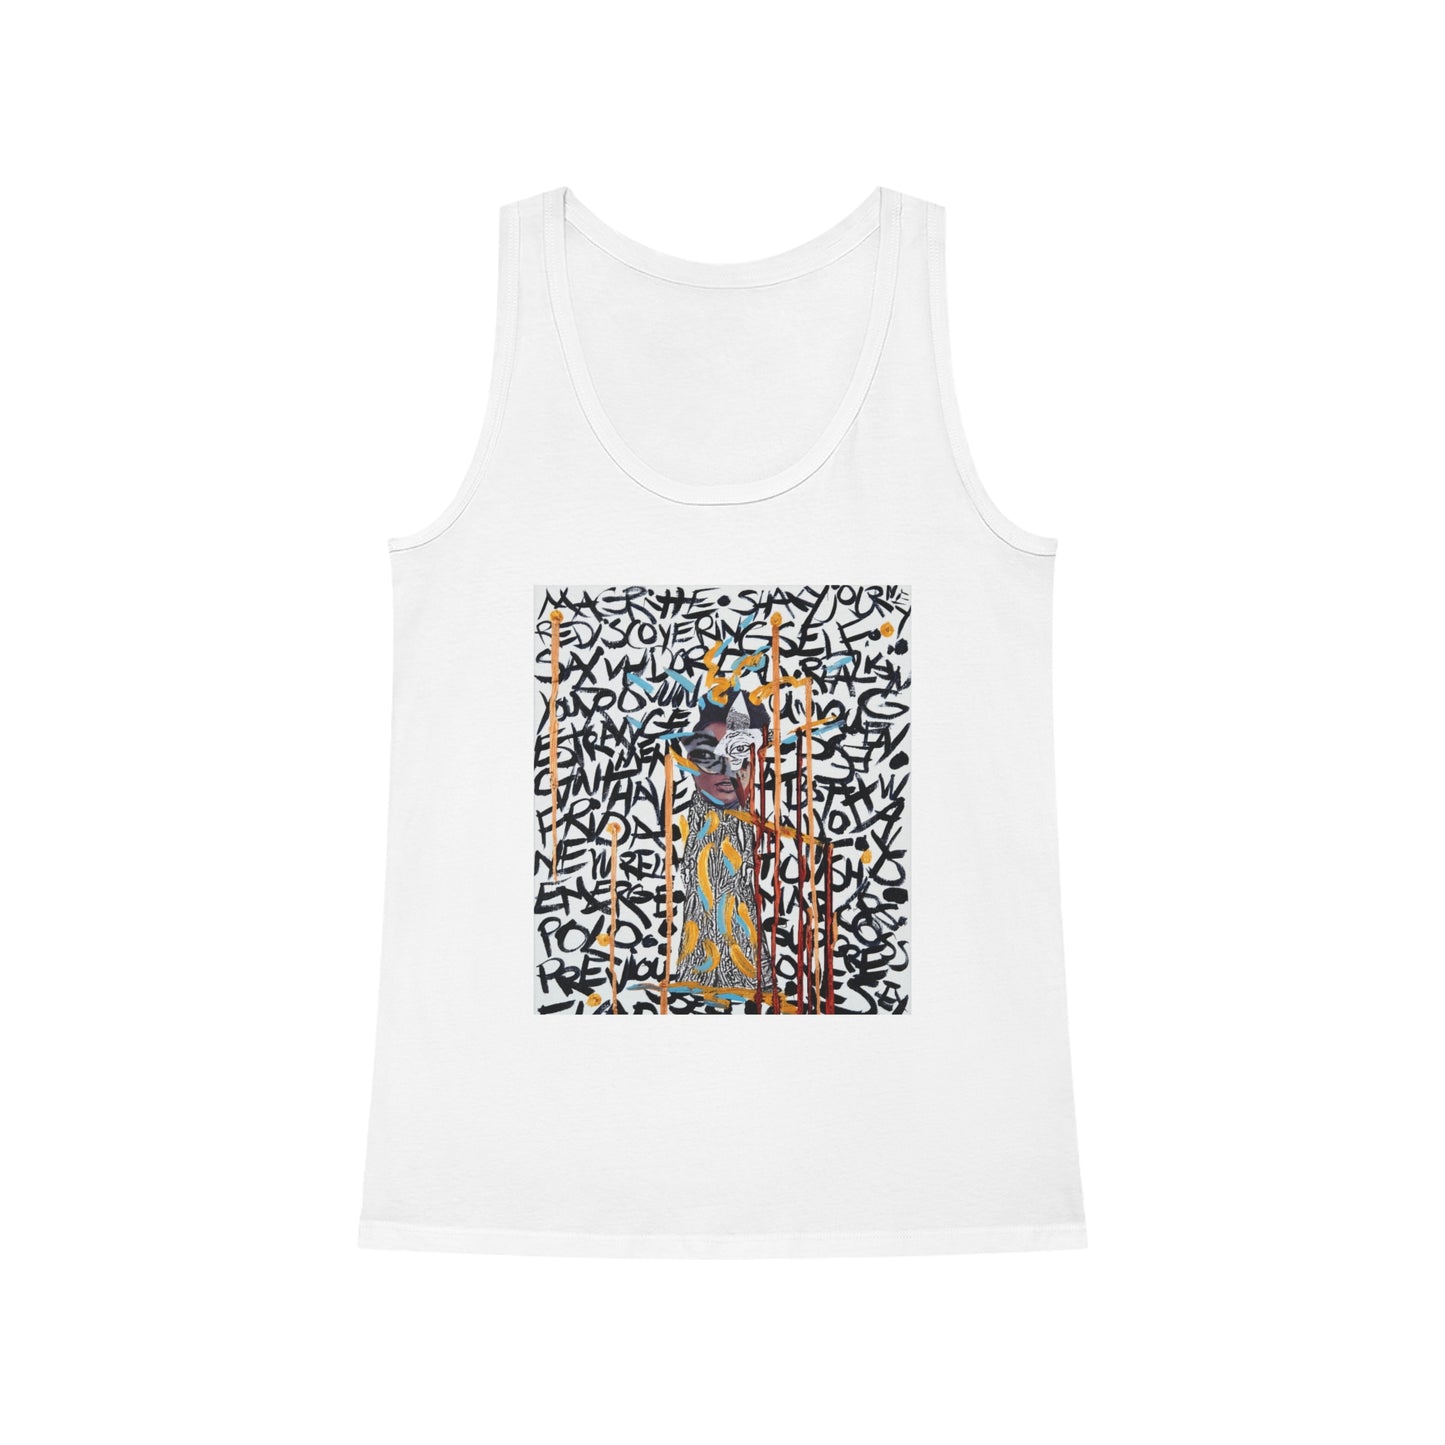 "Magritte by Courtney Minor" Dreamer Tank Top